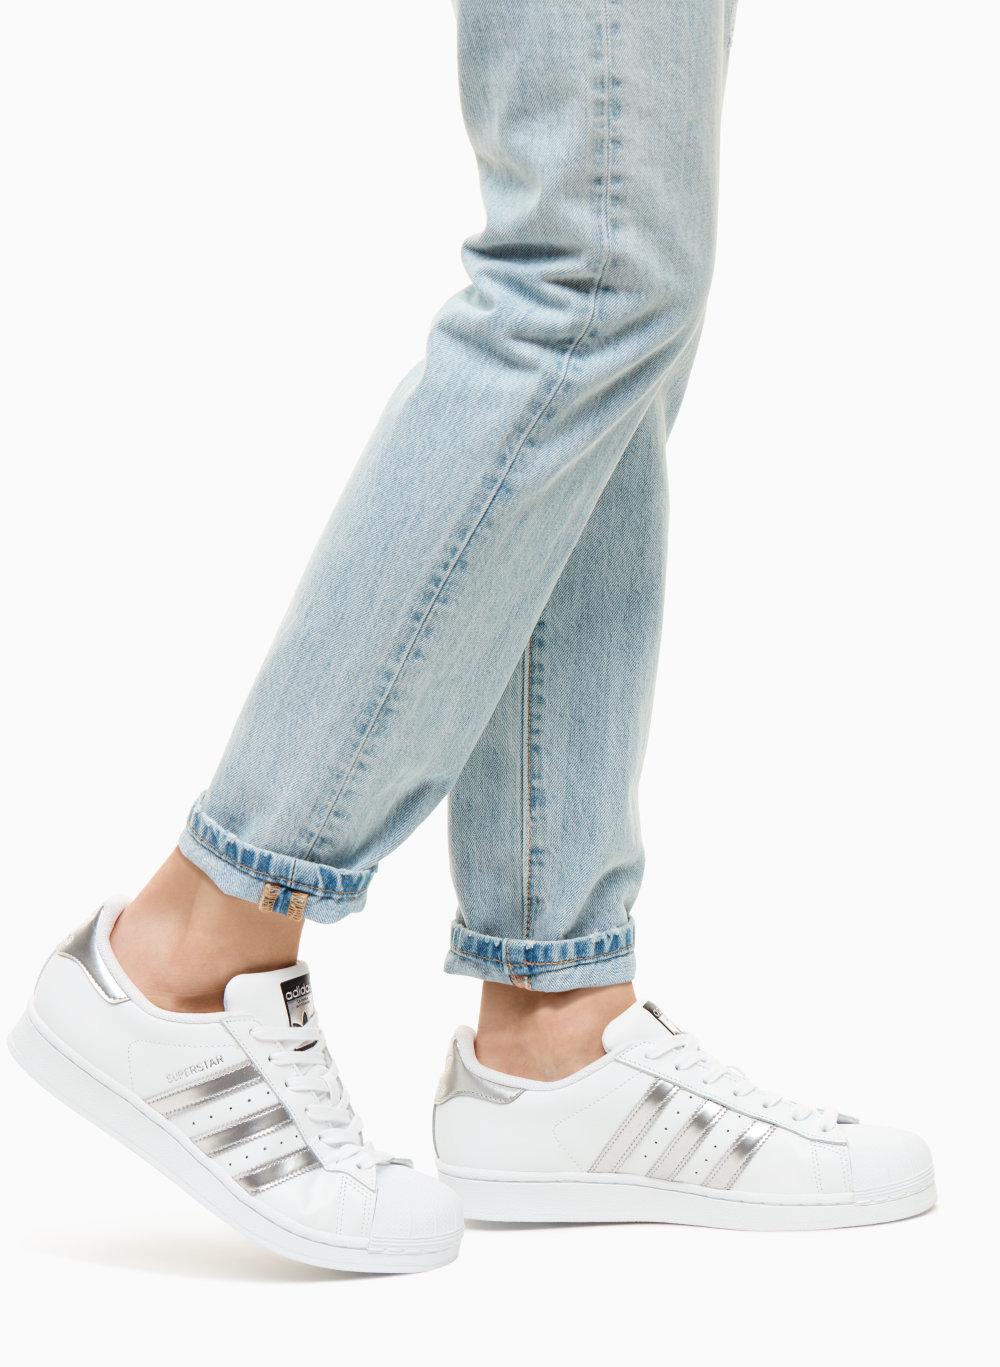 Womens Cheap Adidas Superstar Athletic Shoe white 436265